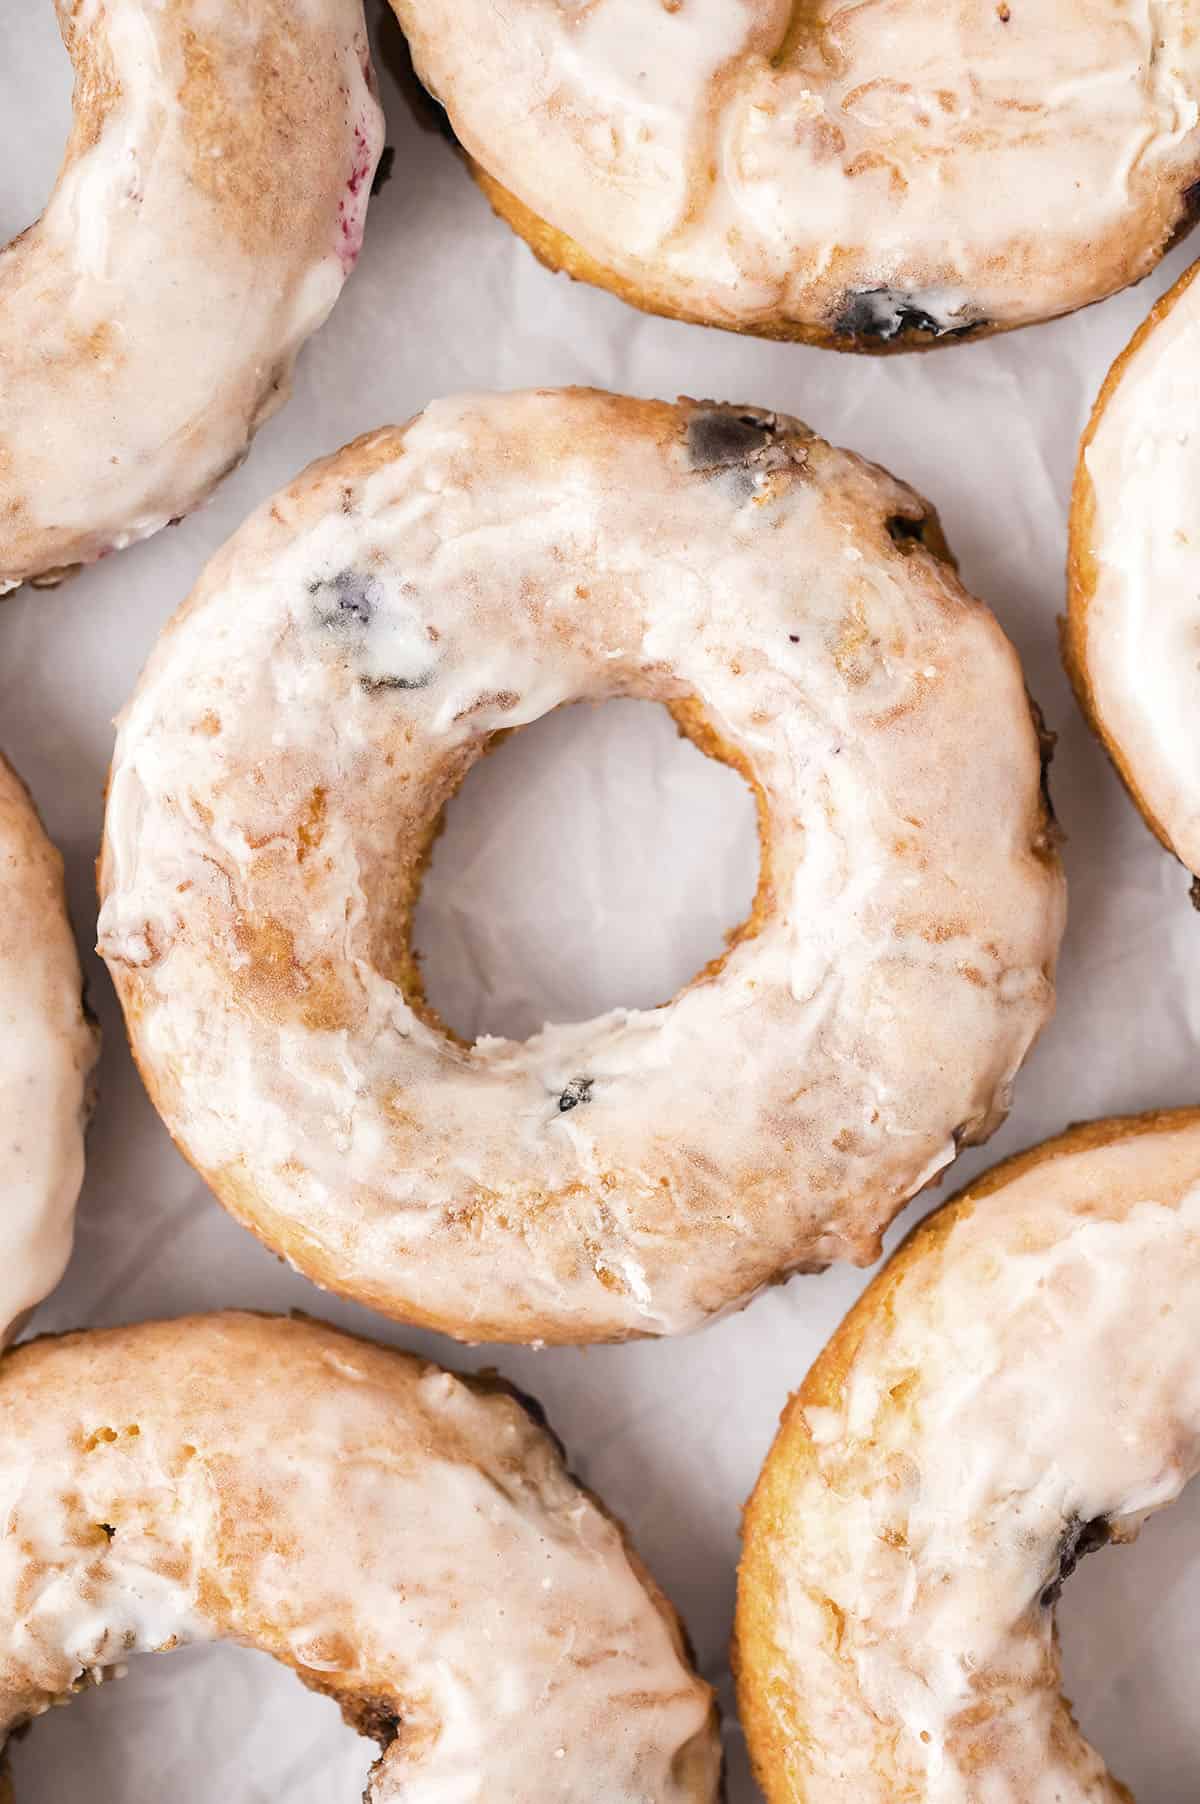 Blueberry donuts on sheet.